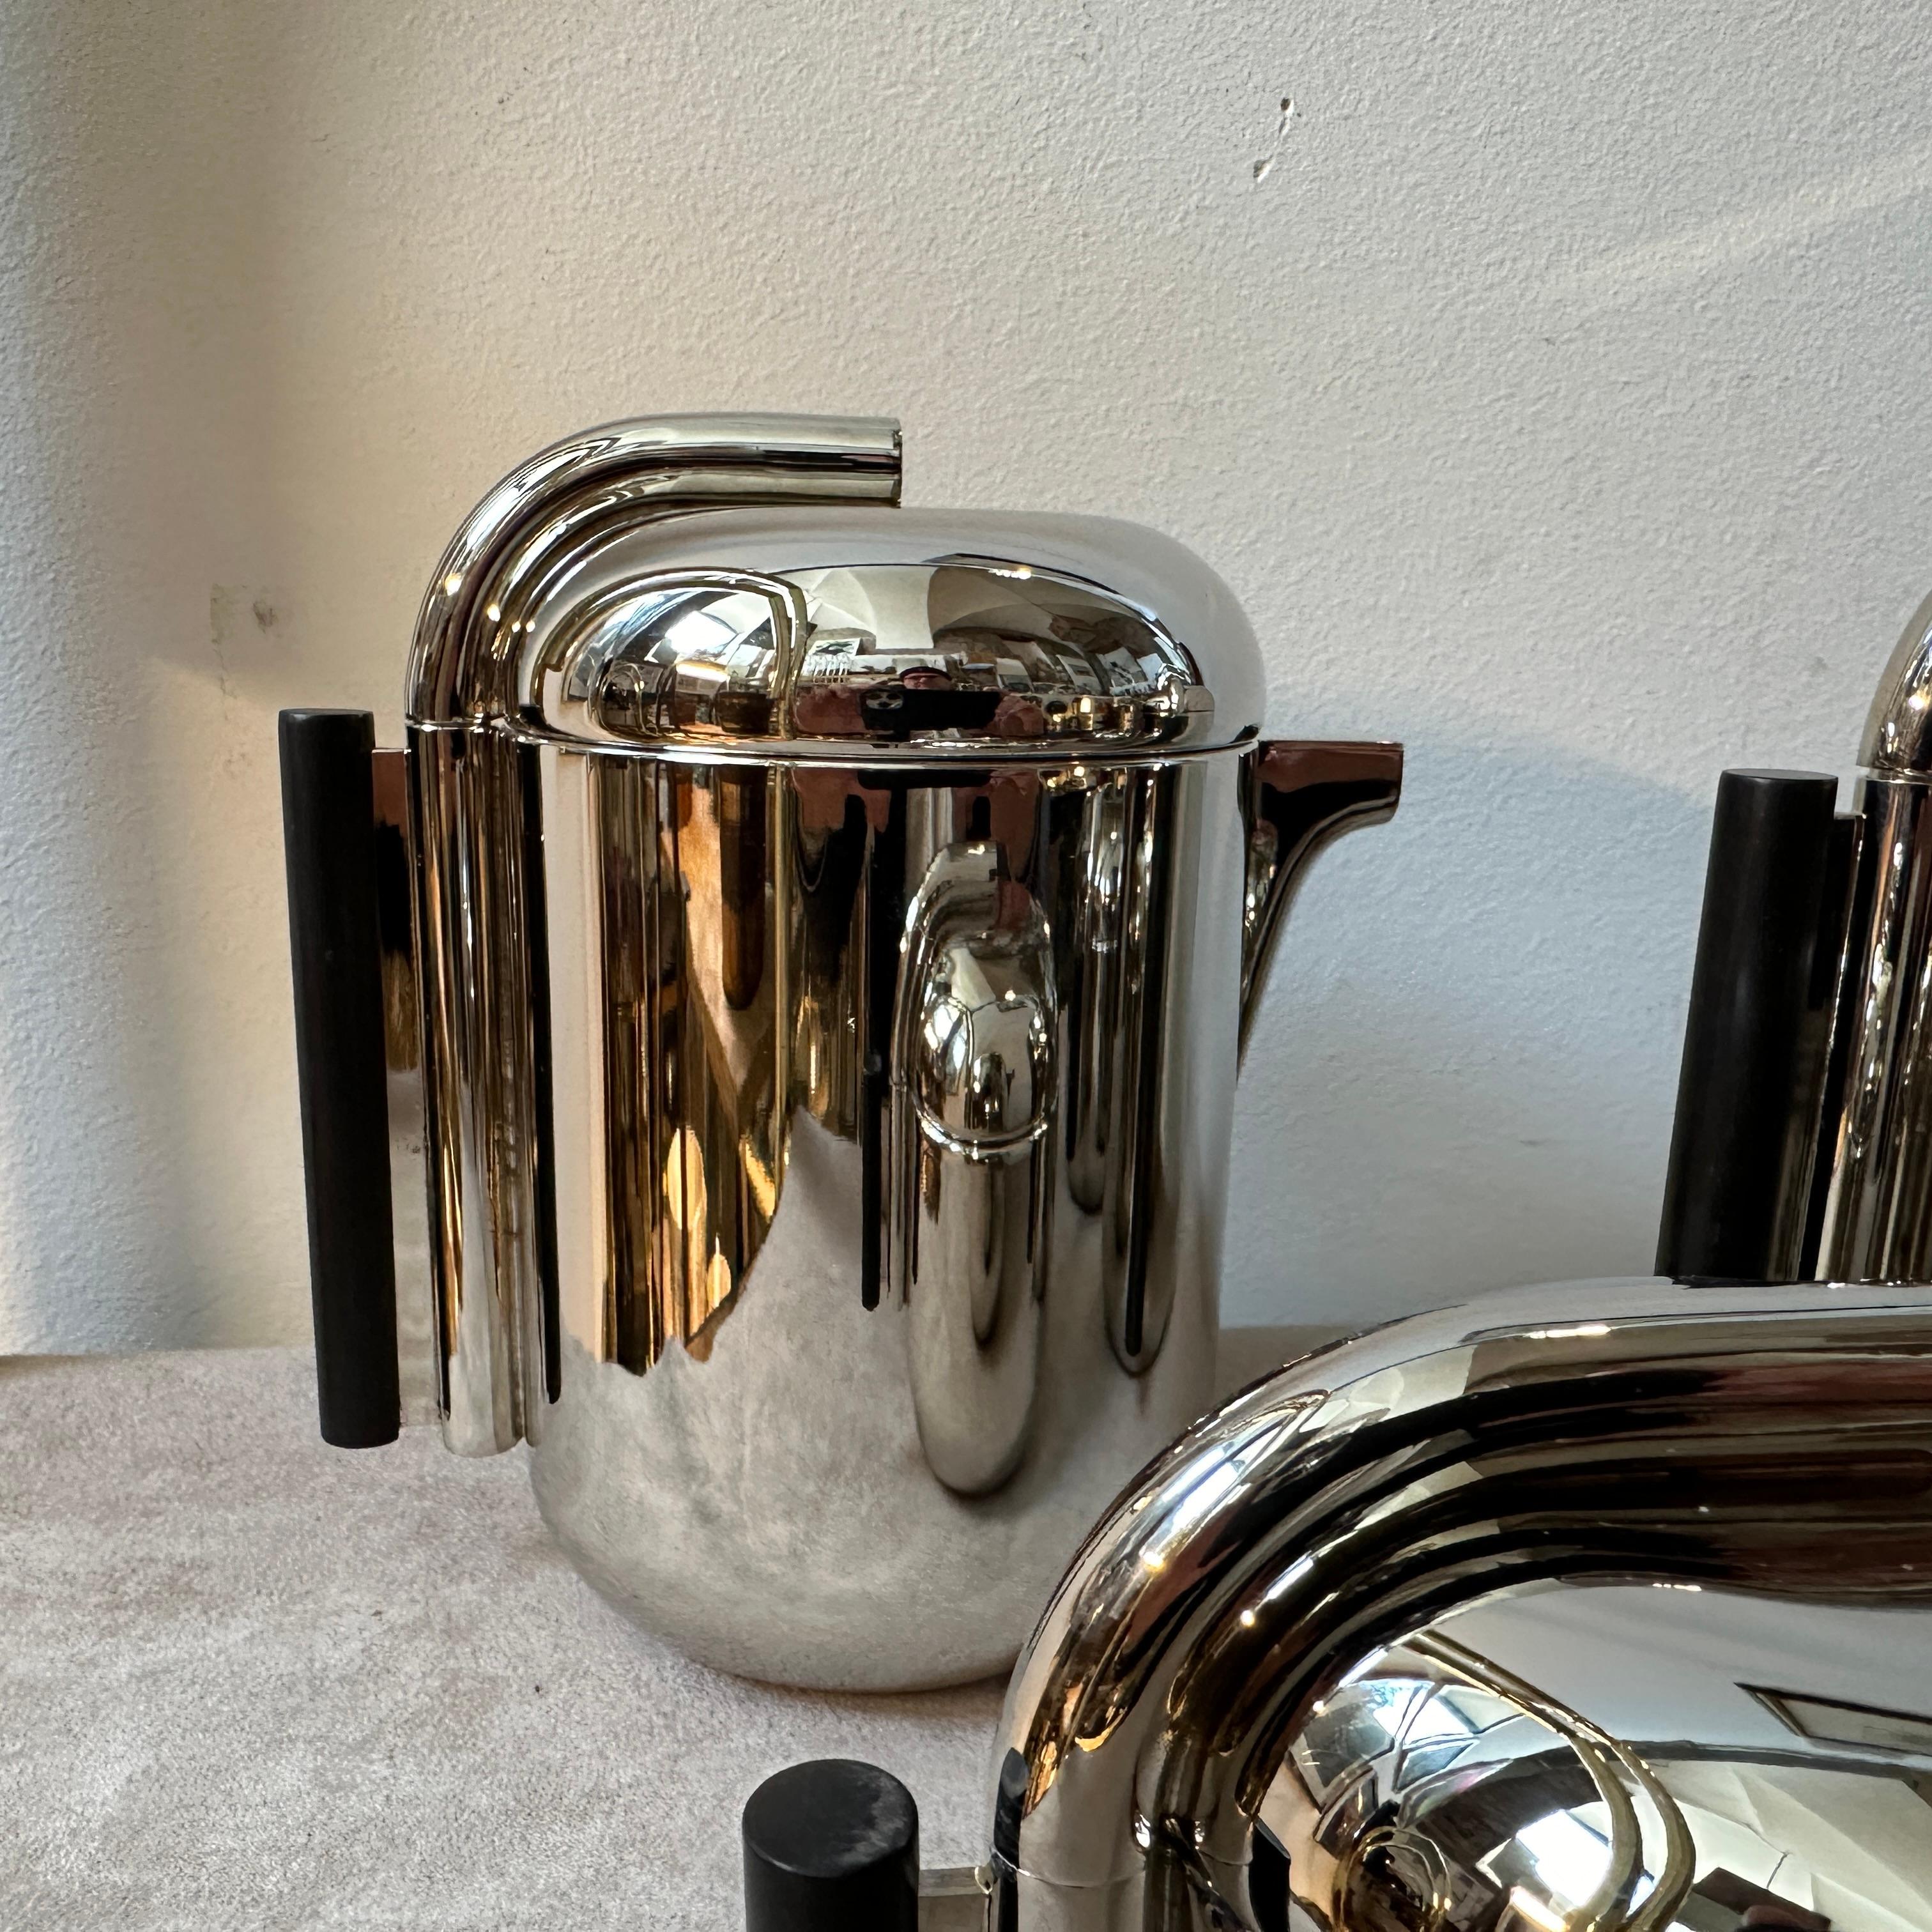 1960s Silver Plated Tea and Coffee Set Designed by G. Coarezza for Mam Milano For Sale 5